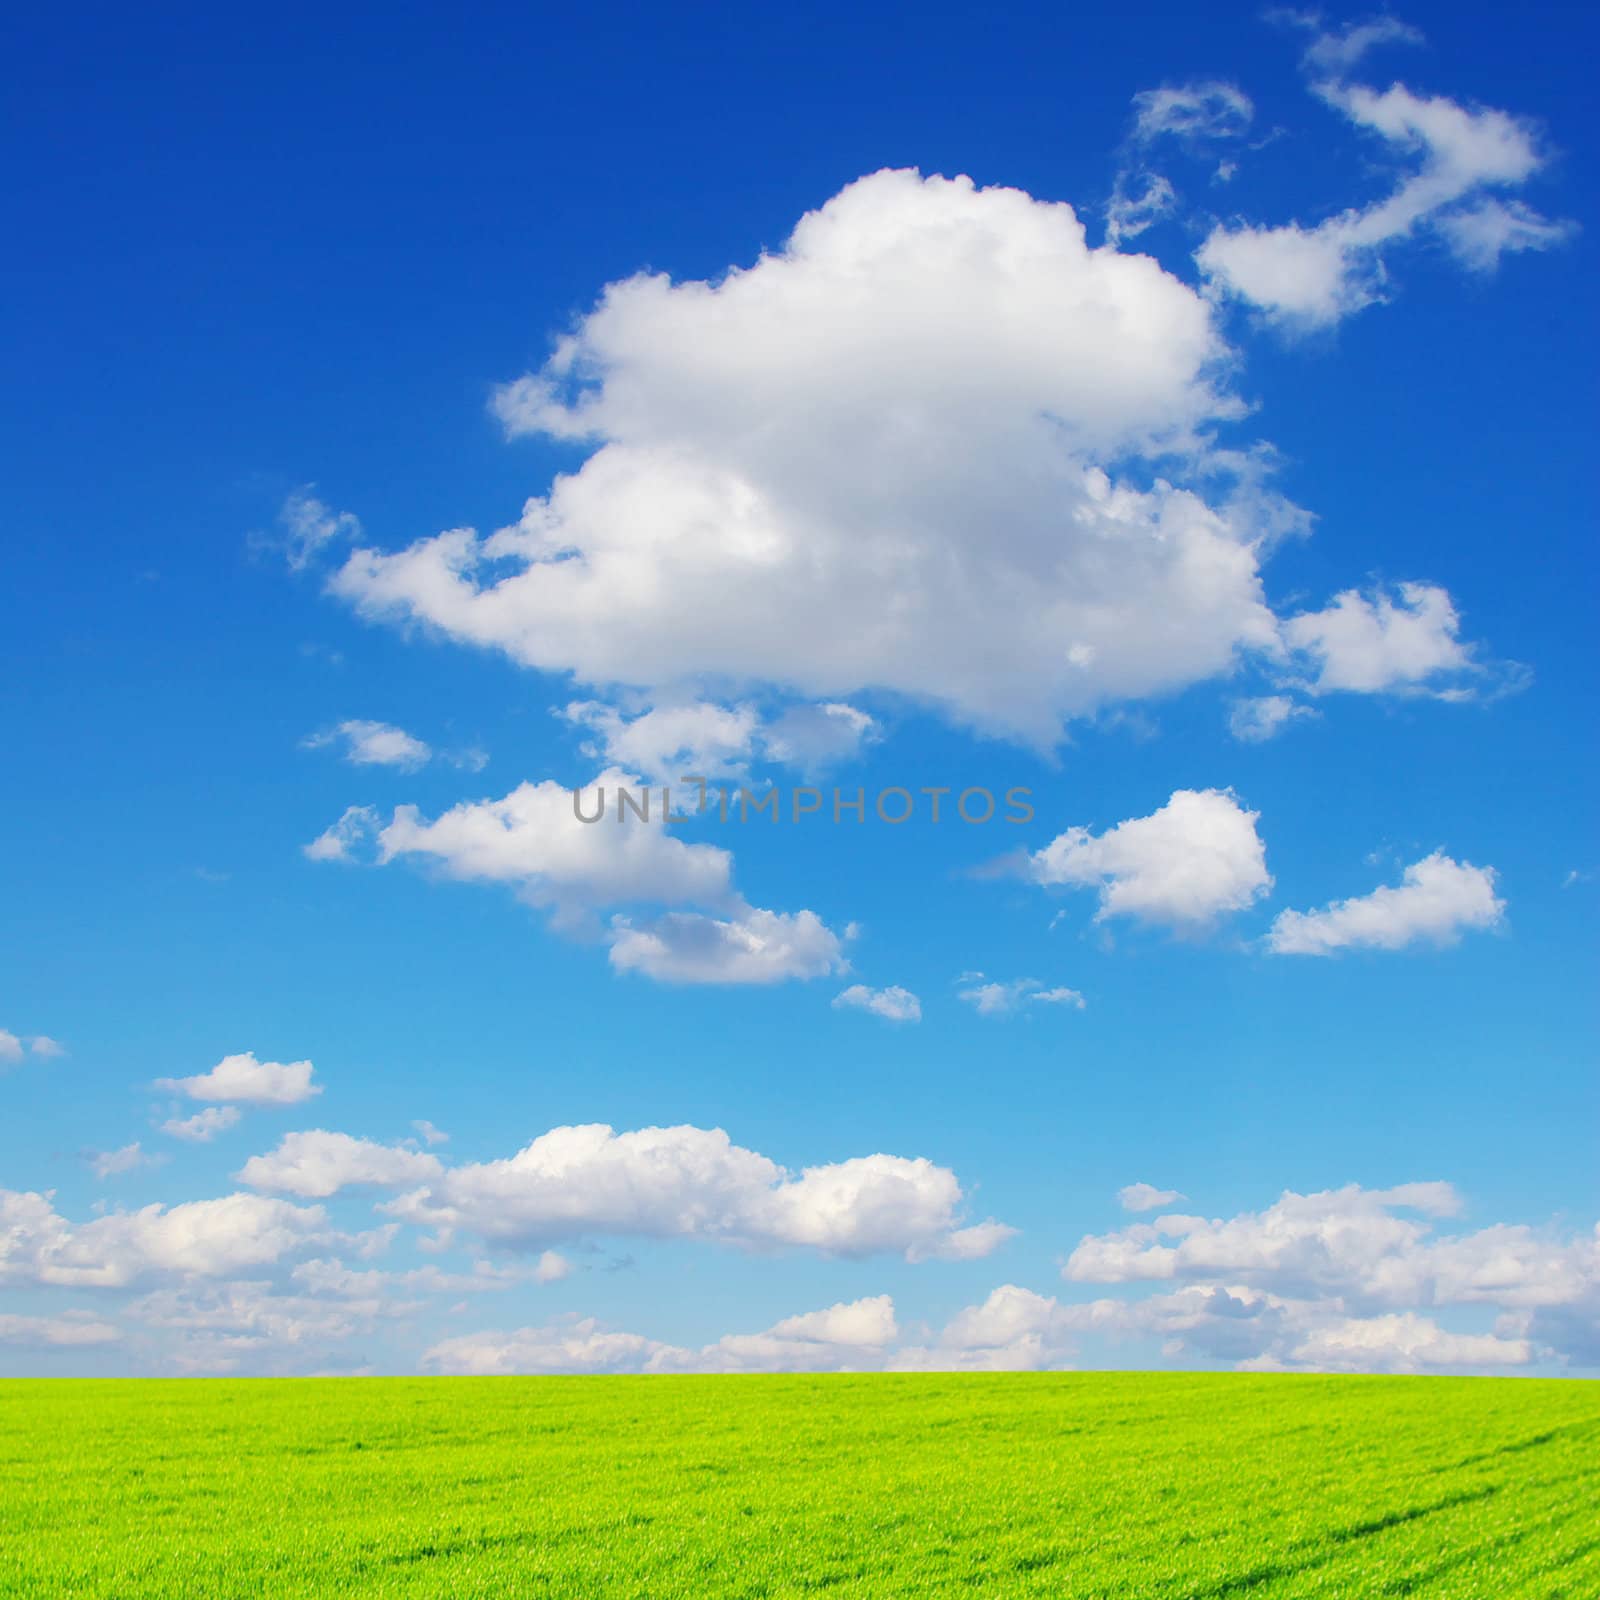  field of green grass and blue cloudy sky